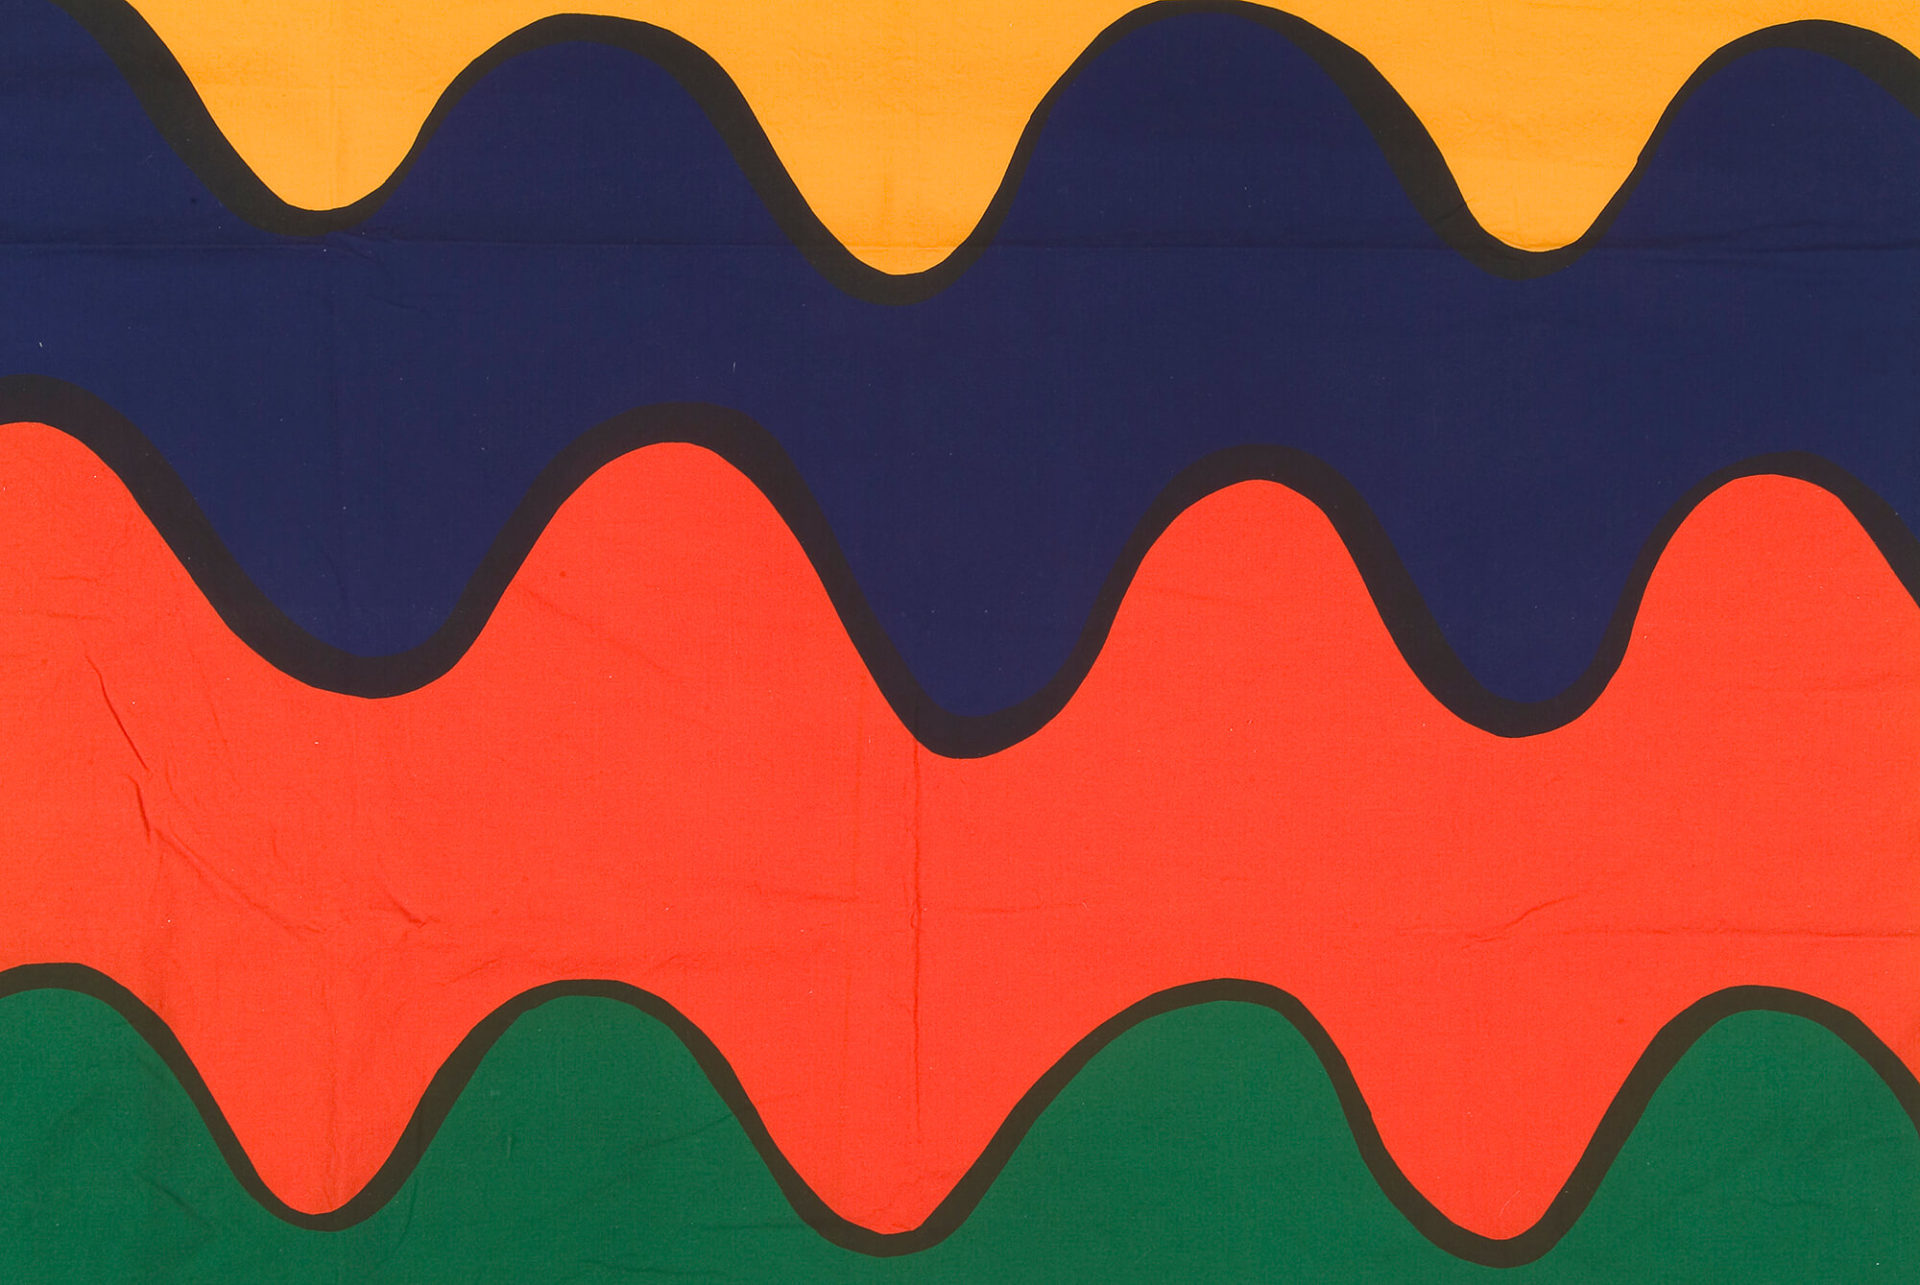 Textile with thick, horizontal rippling stripes in yellow, blue, orange, and green, each outlined in black.